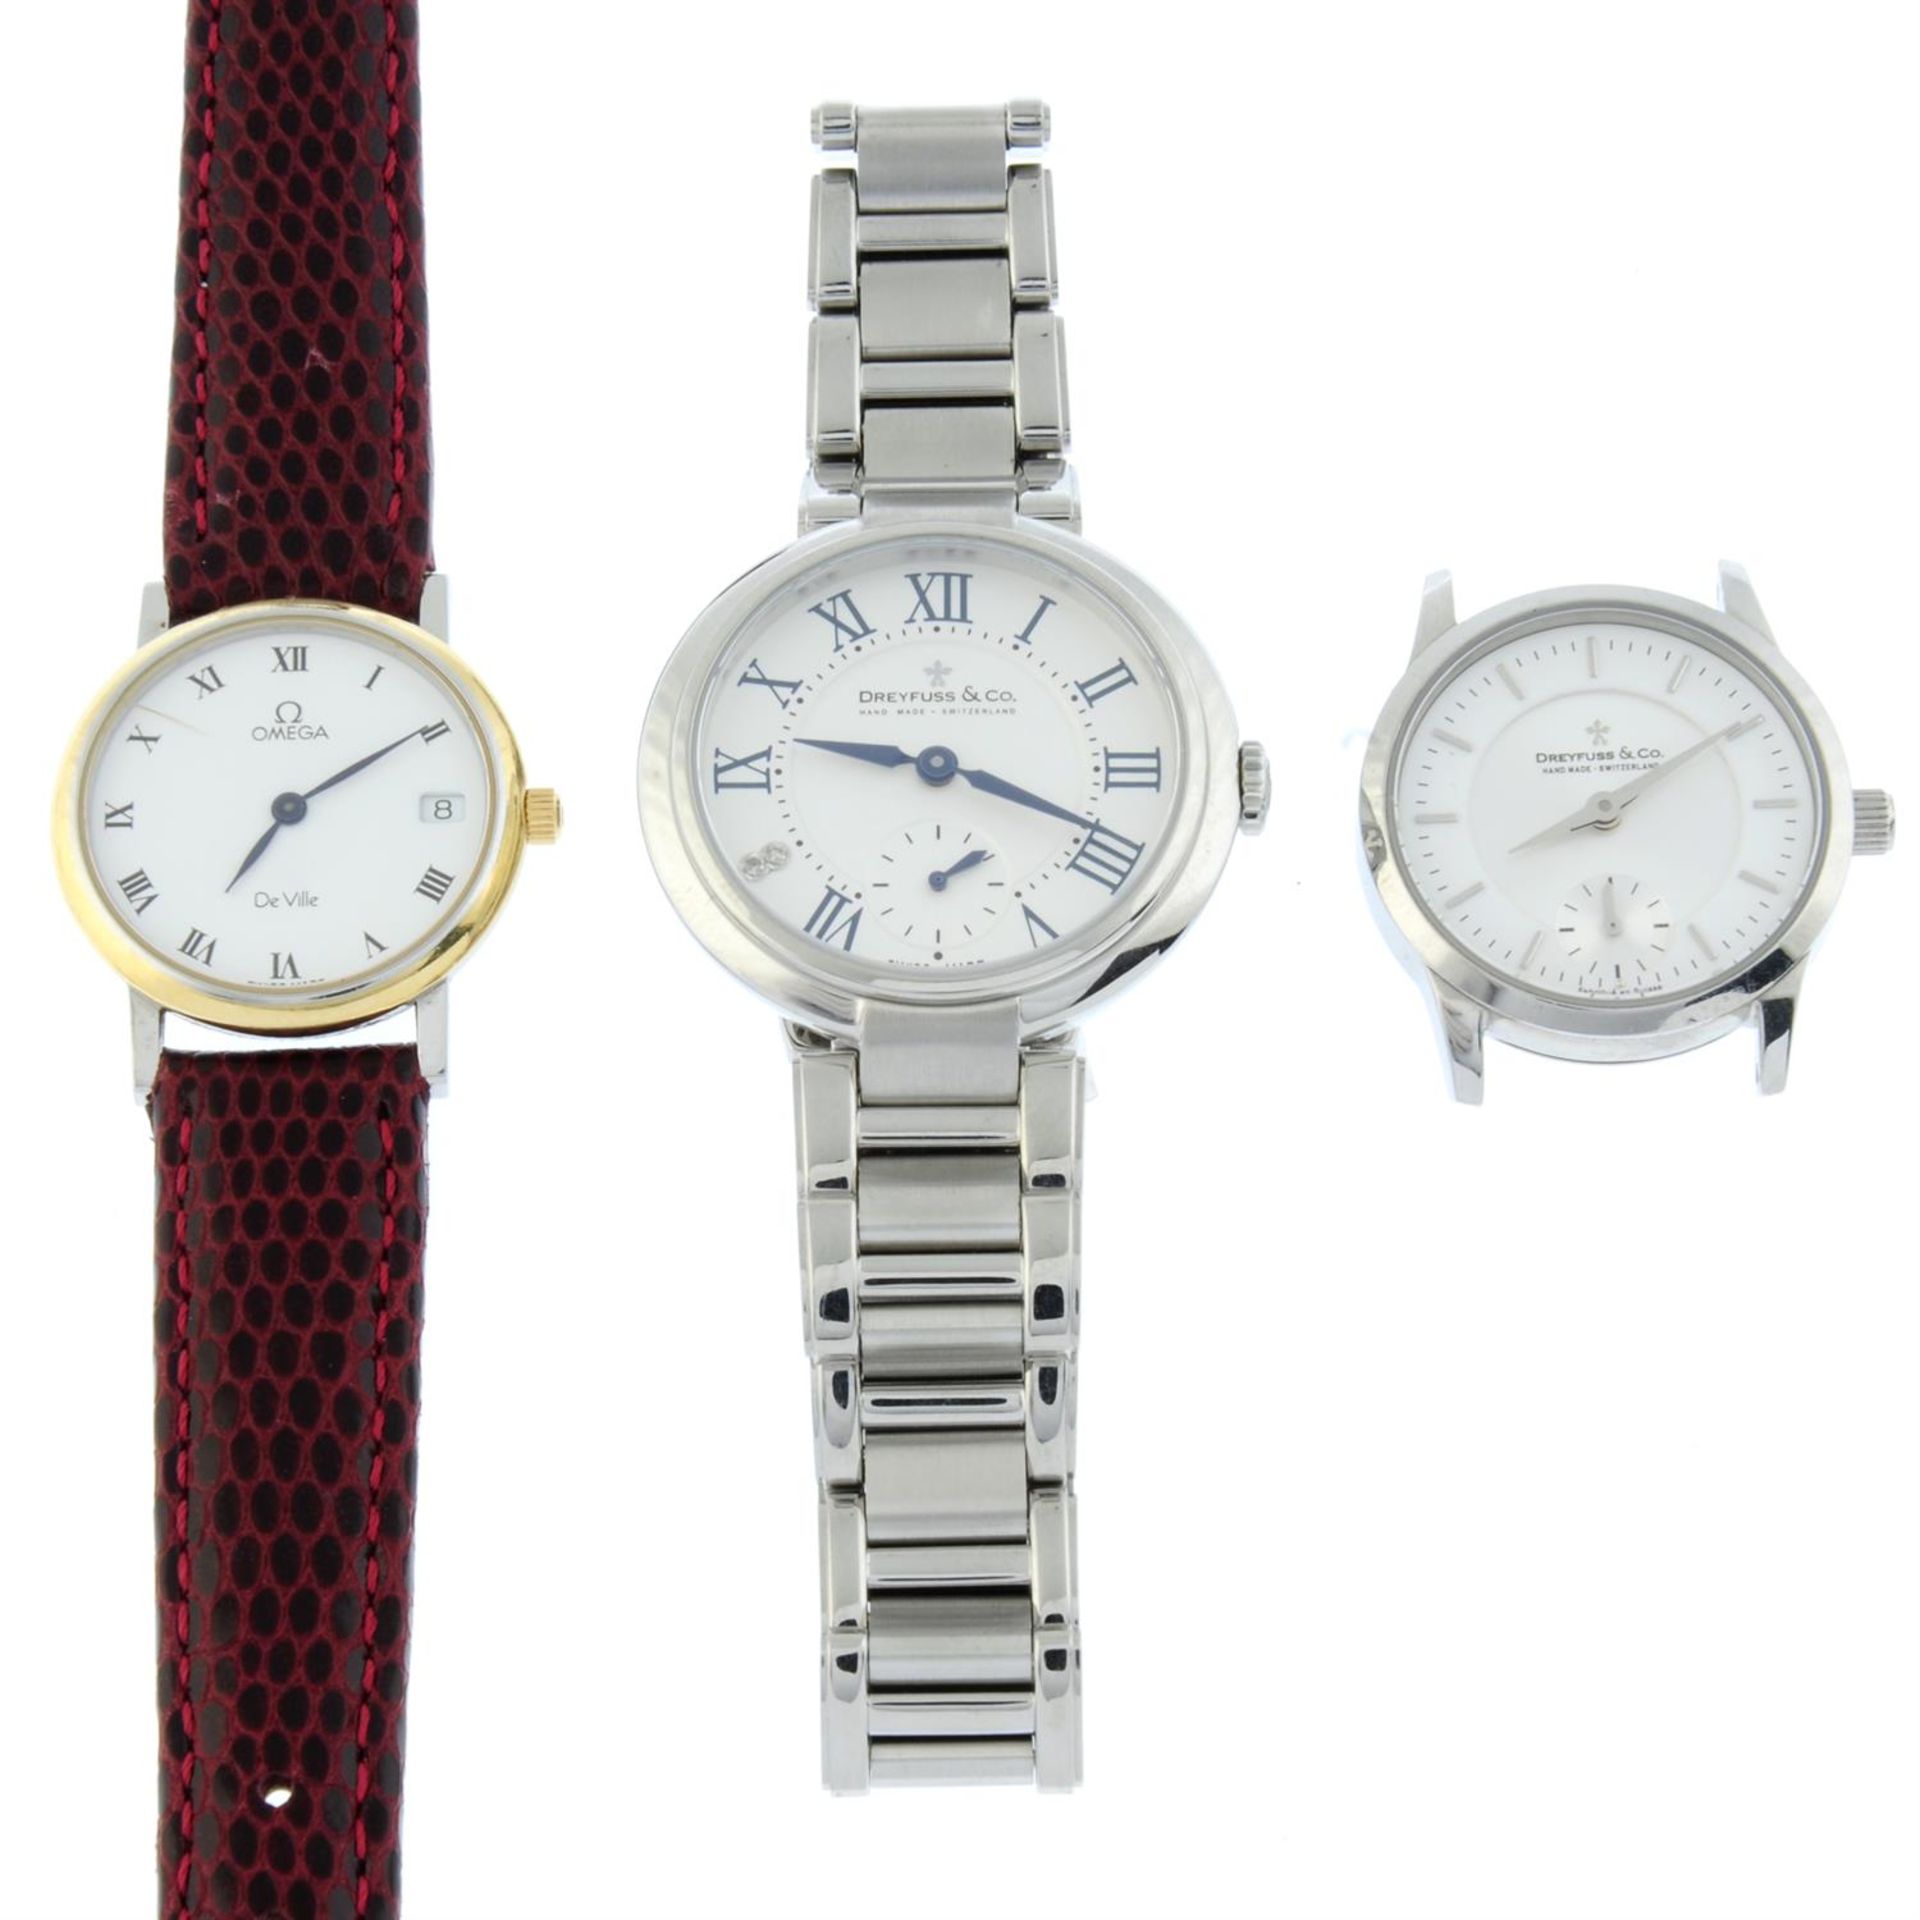 Omega - a DeVille watch (25mm) with two Dreyfuss & Co watches.